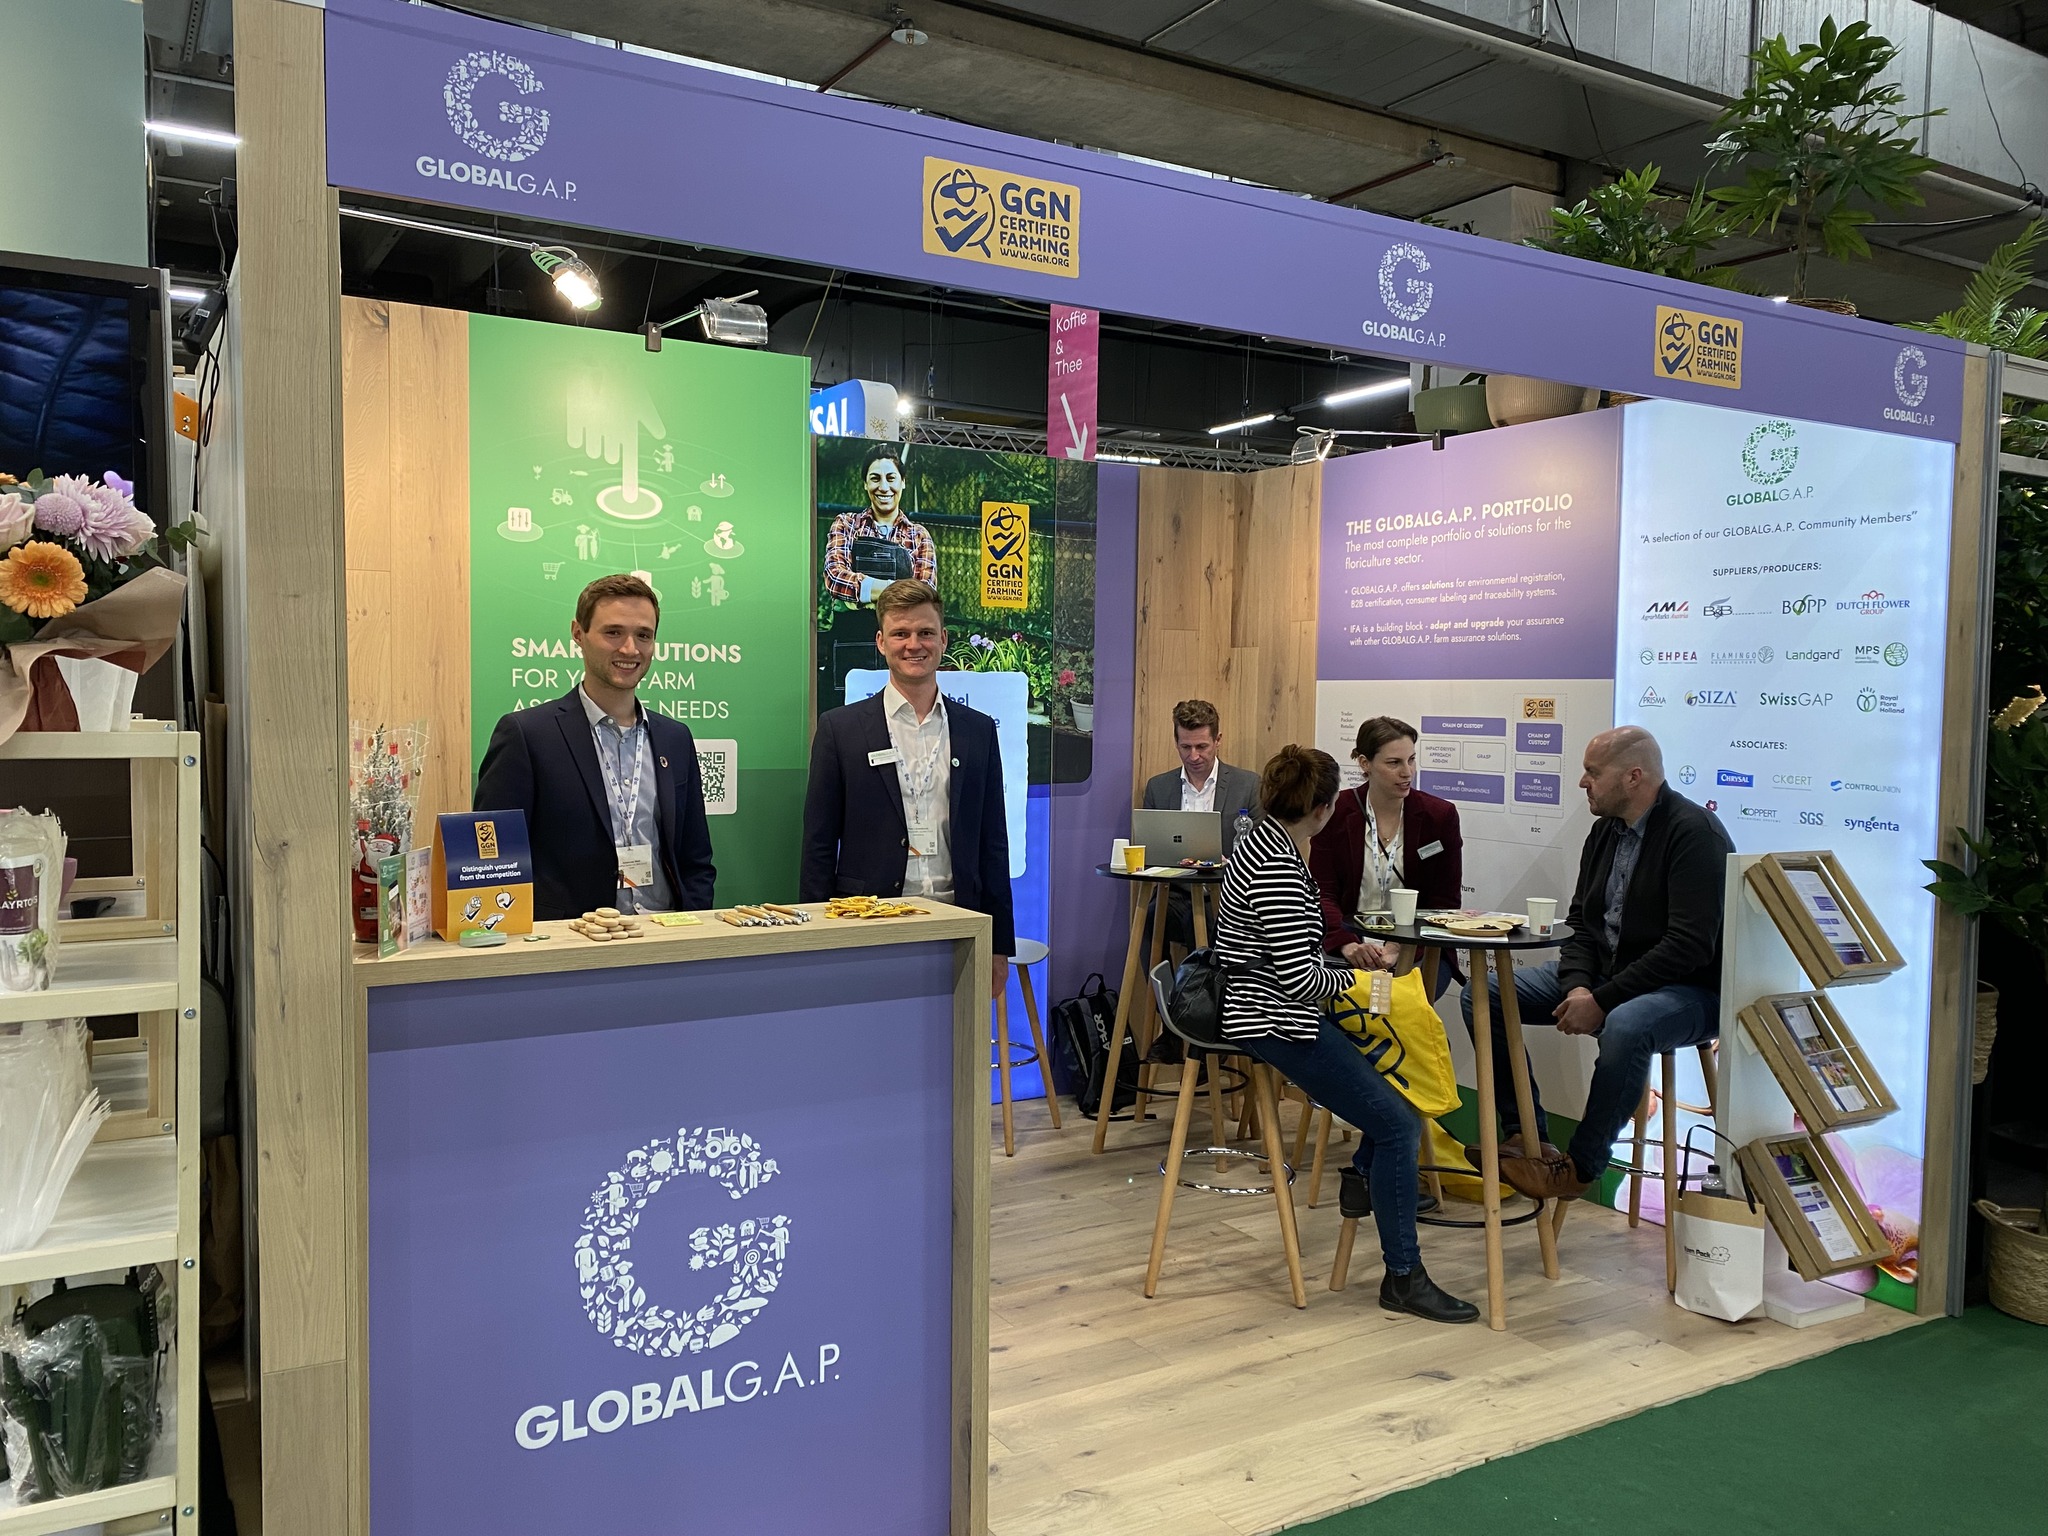 GLOBALG.A.P.'s stand at Aalsmeer trade fair. Copyright: GLOBALG.A.P..